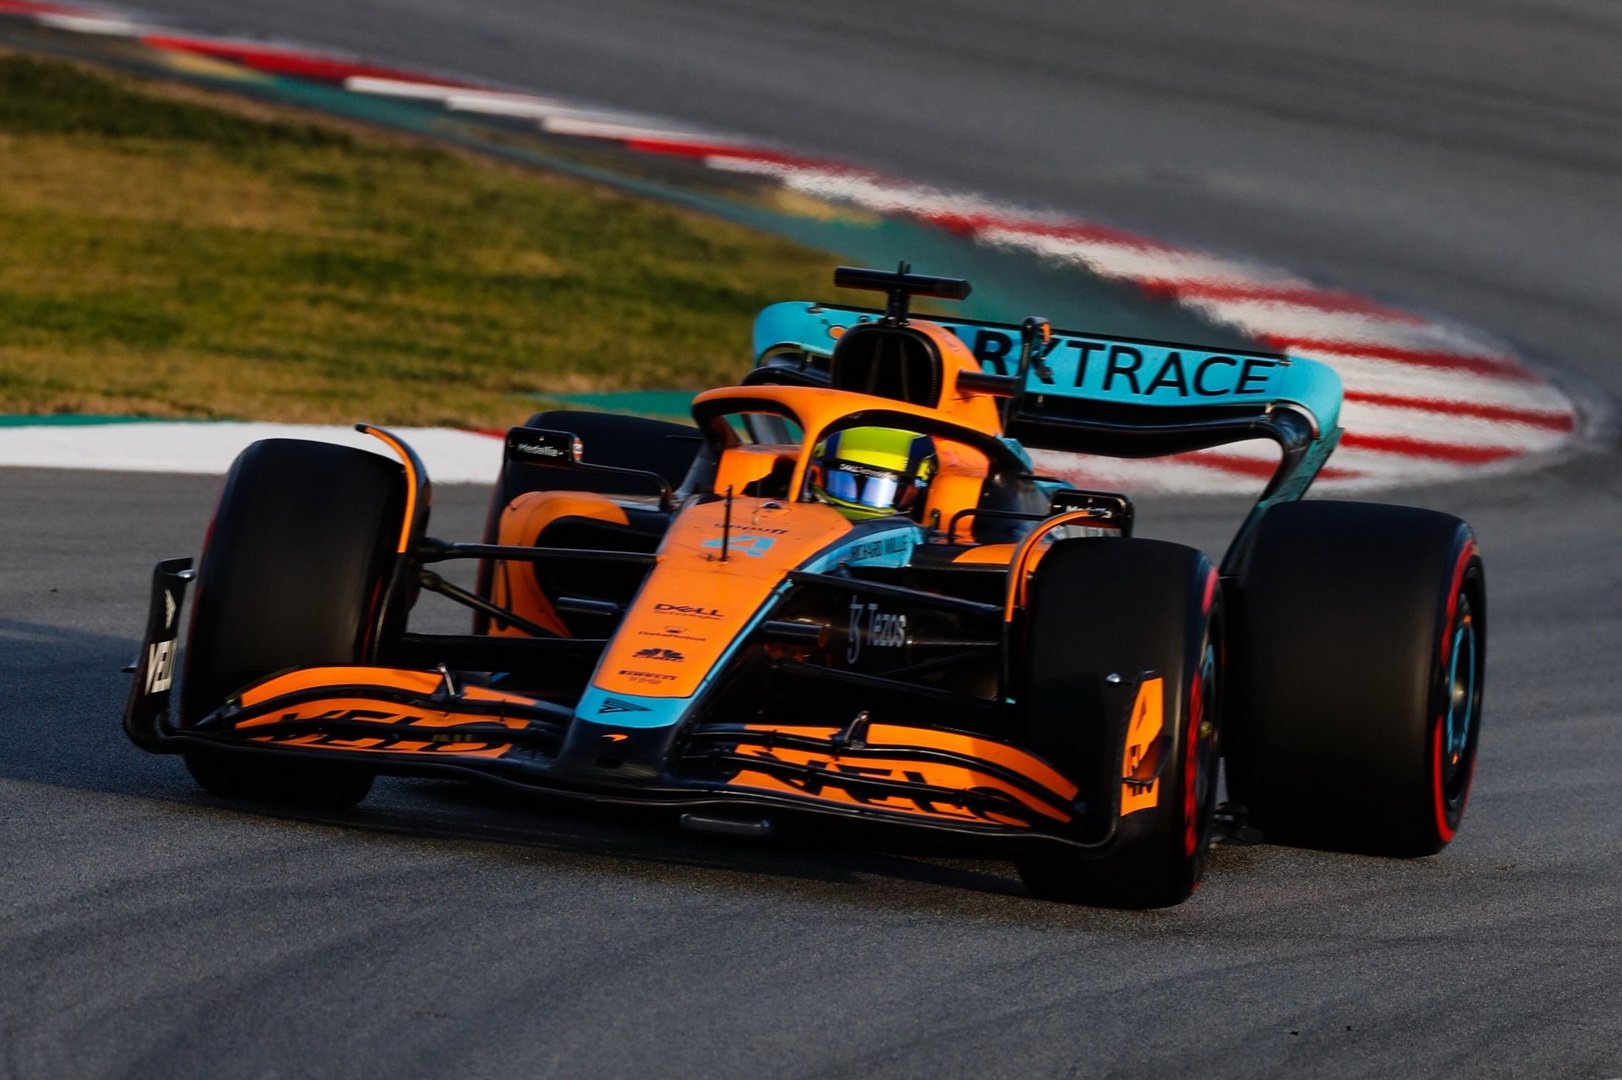 McLaren's Lando Norris Says 2022 F1 Cars Feel “Quite Sluggish” After First Official Test